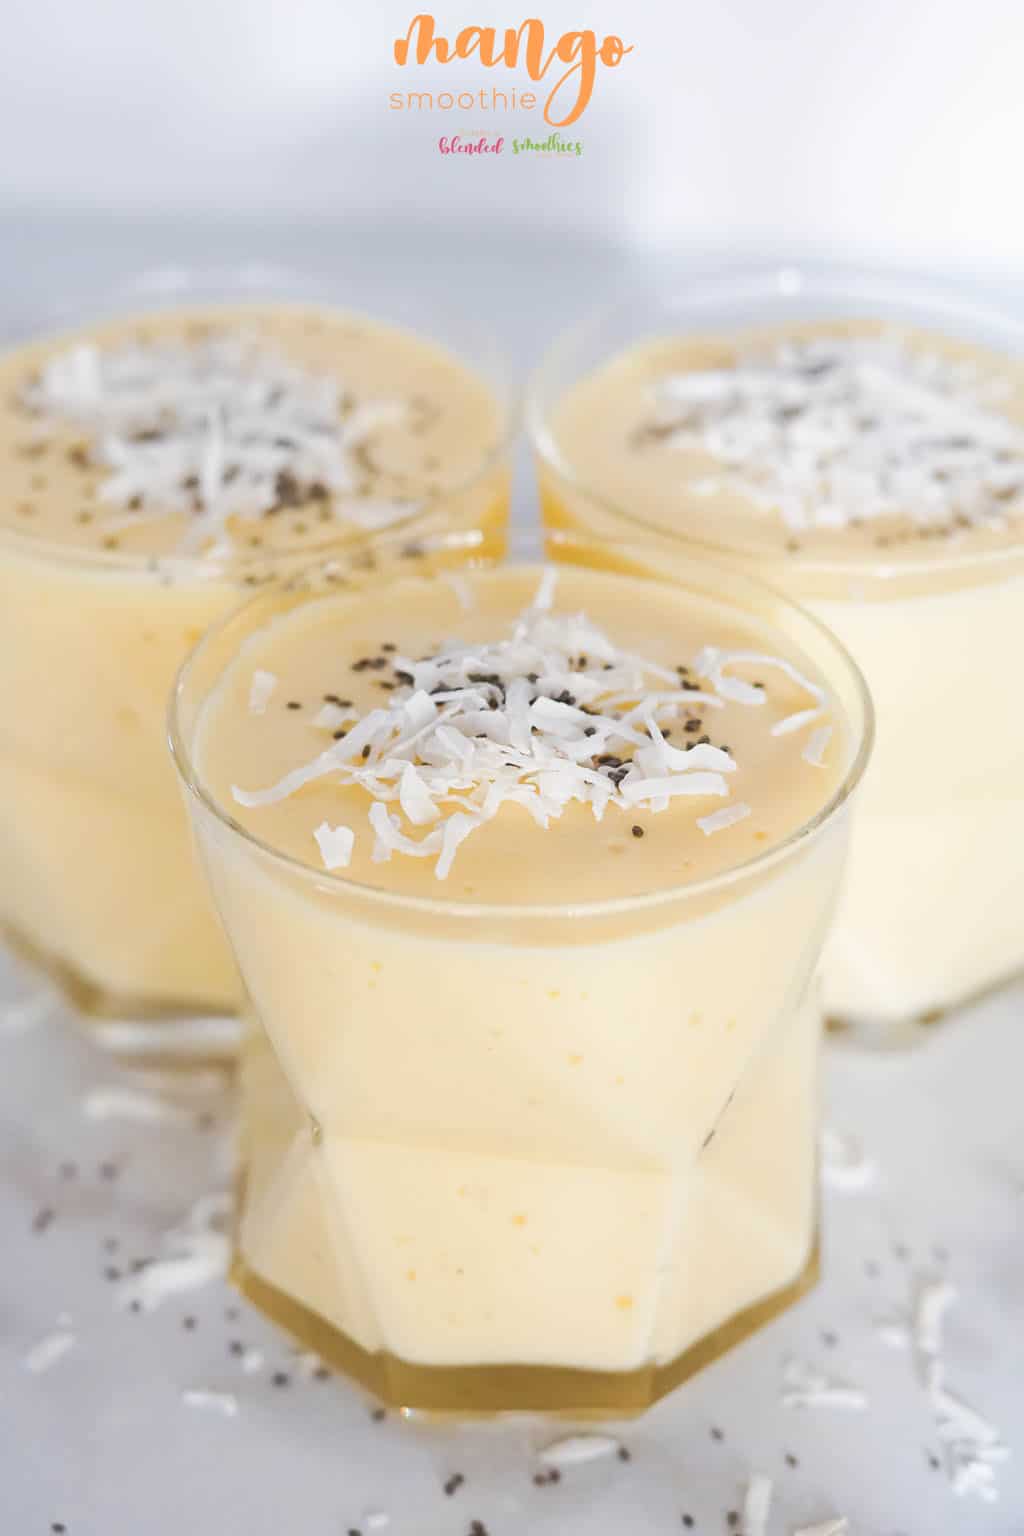 Mango Smoothie - This Mango Smoothie Recipe Is Full Of Tropical Flavor And The Perfect Healthy Smoothie For Breakfast Brunch Lunch Dinner Or Dessert - Mango And Banana Smoothie